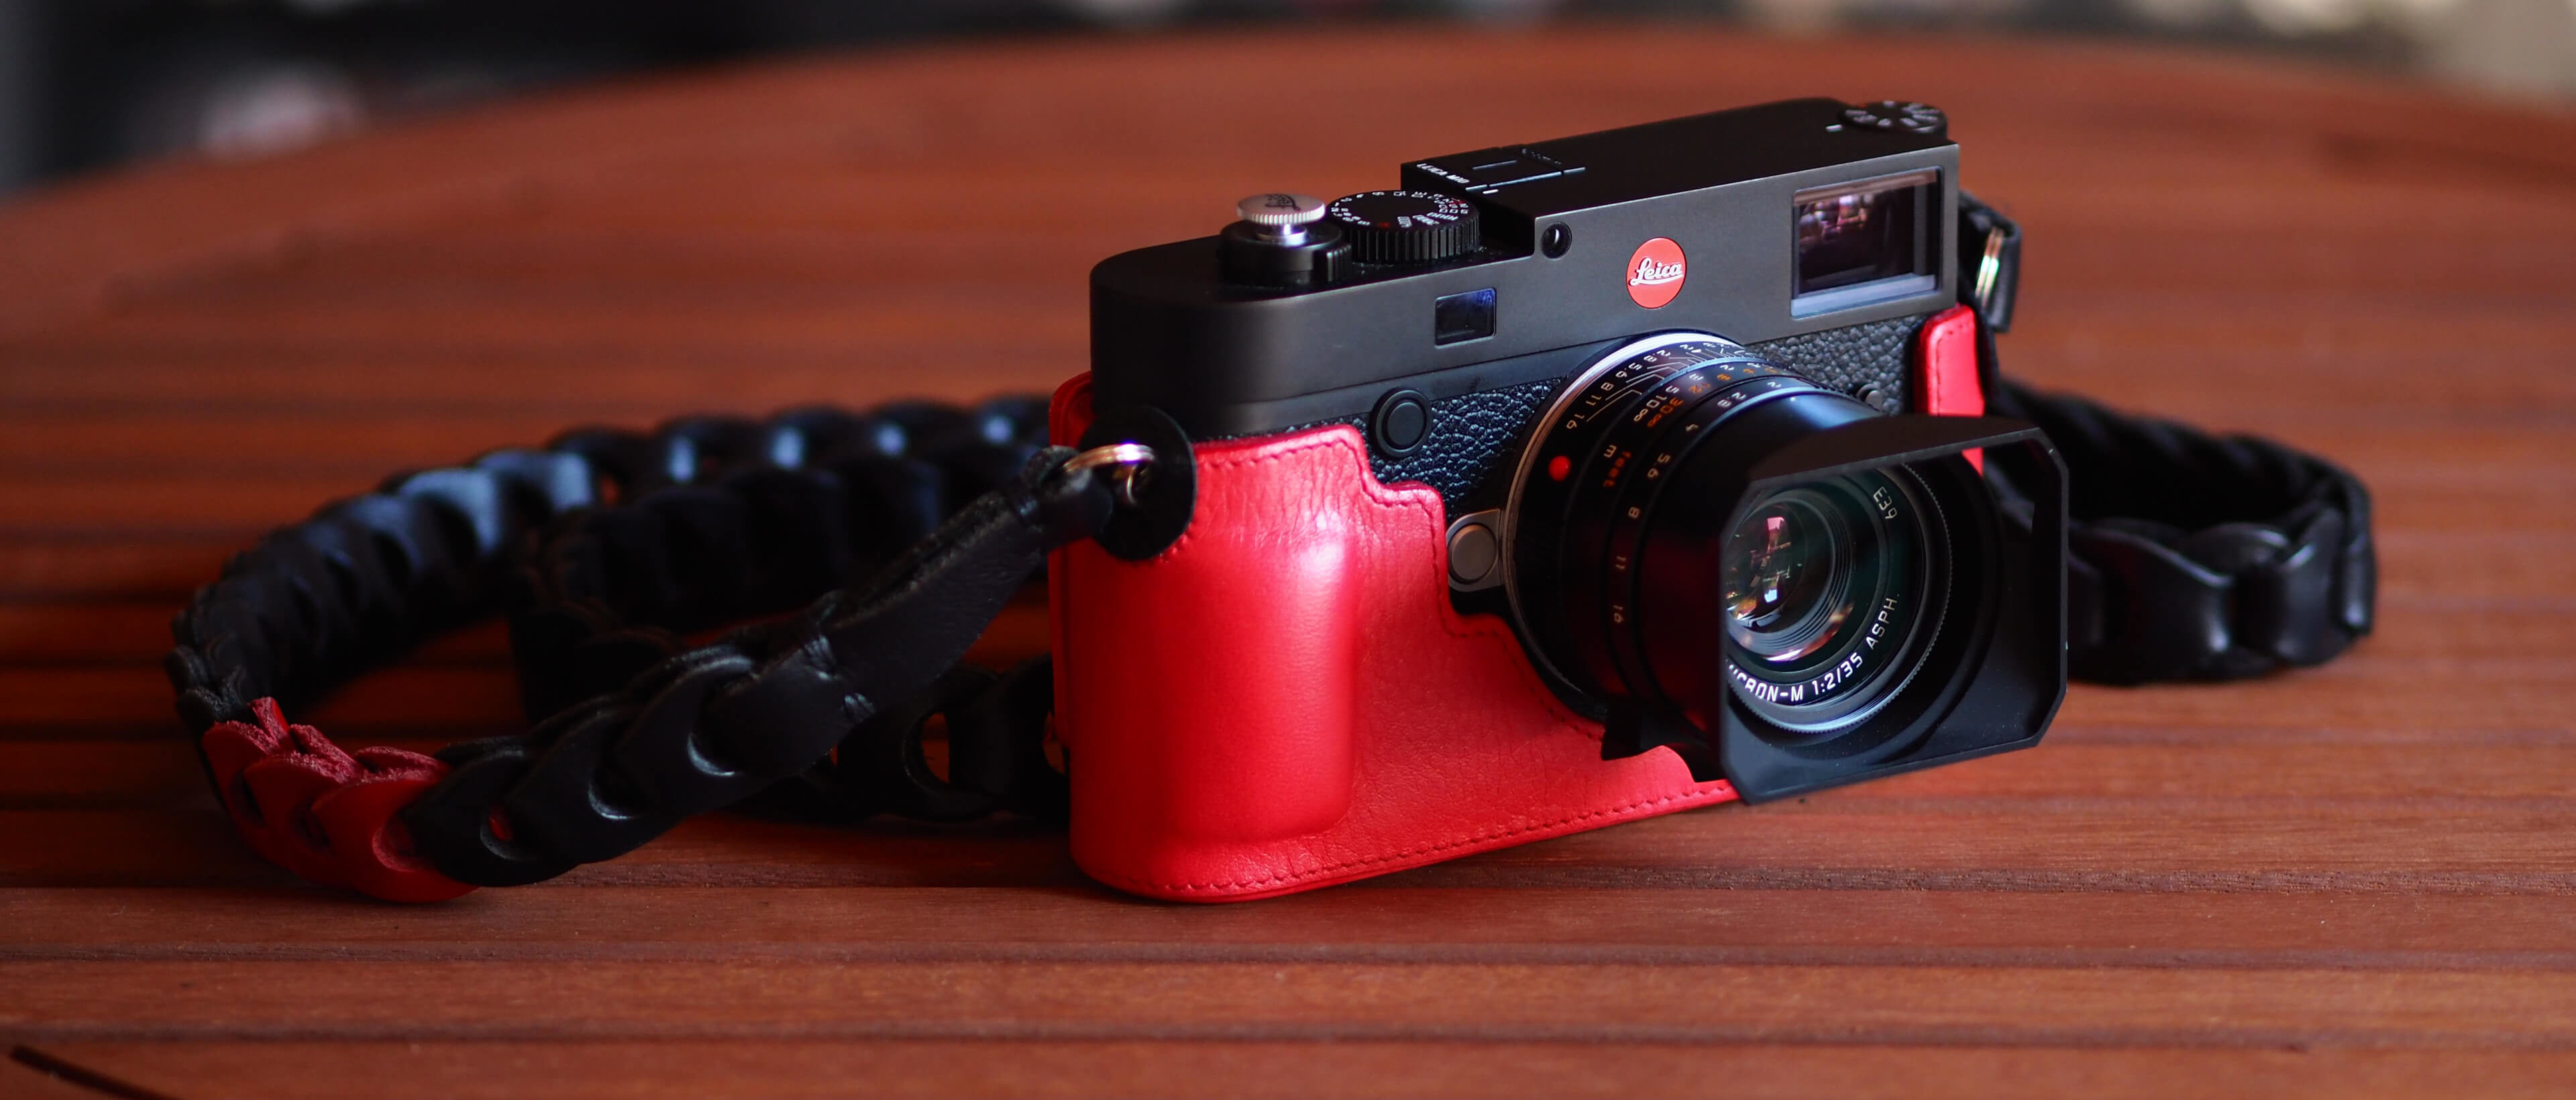 Background: Post Thumbnail: Leica – From Eye to Insight